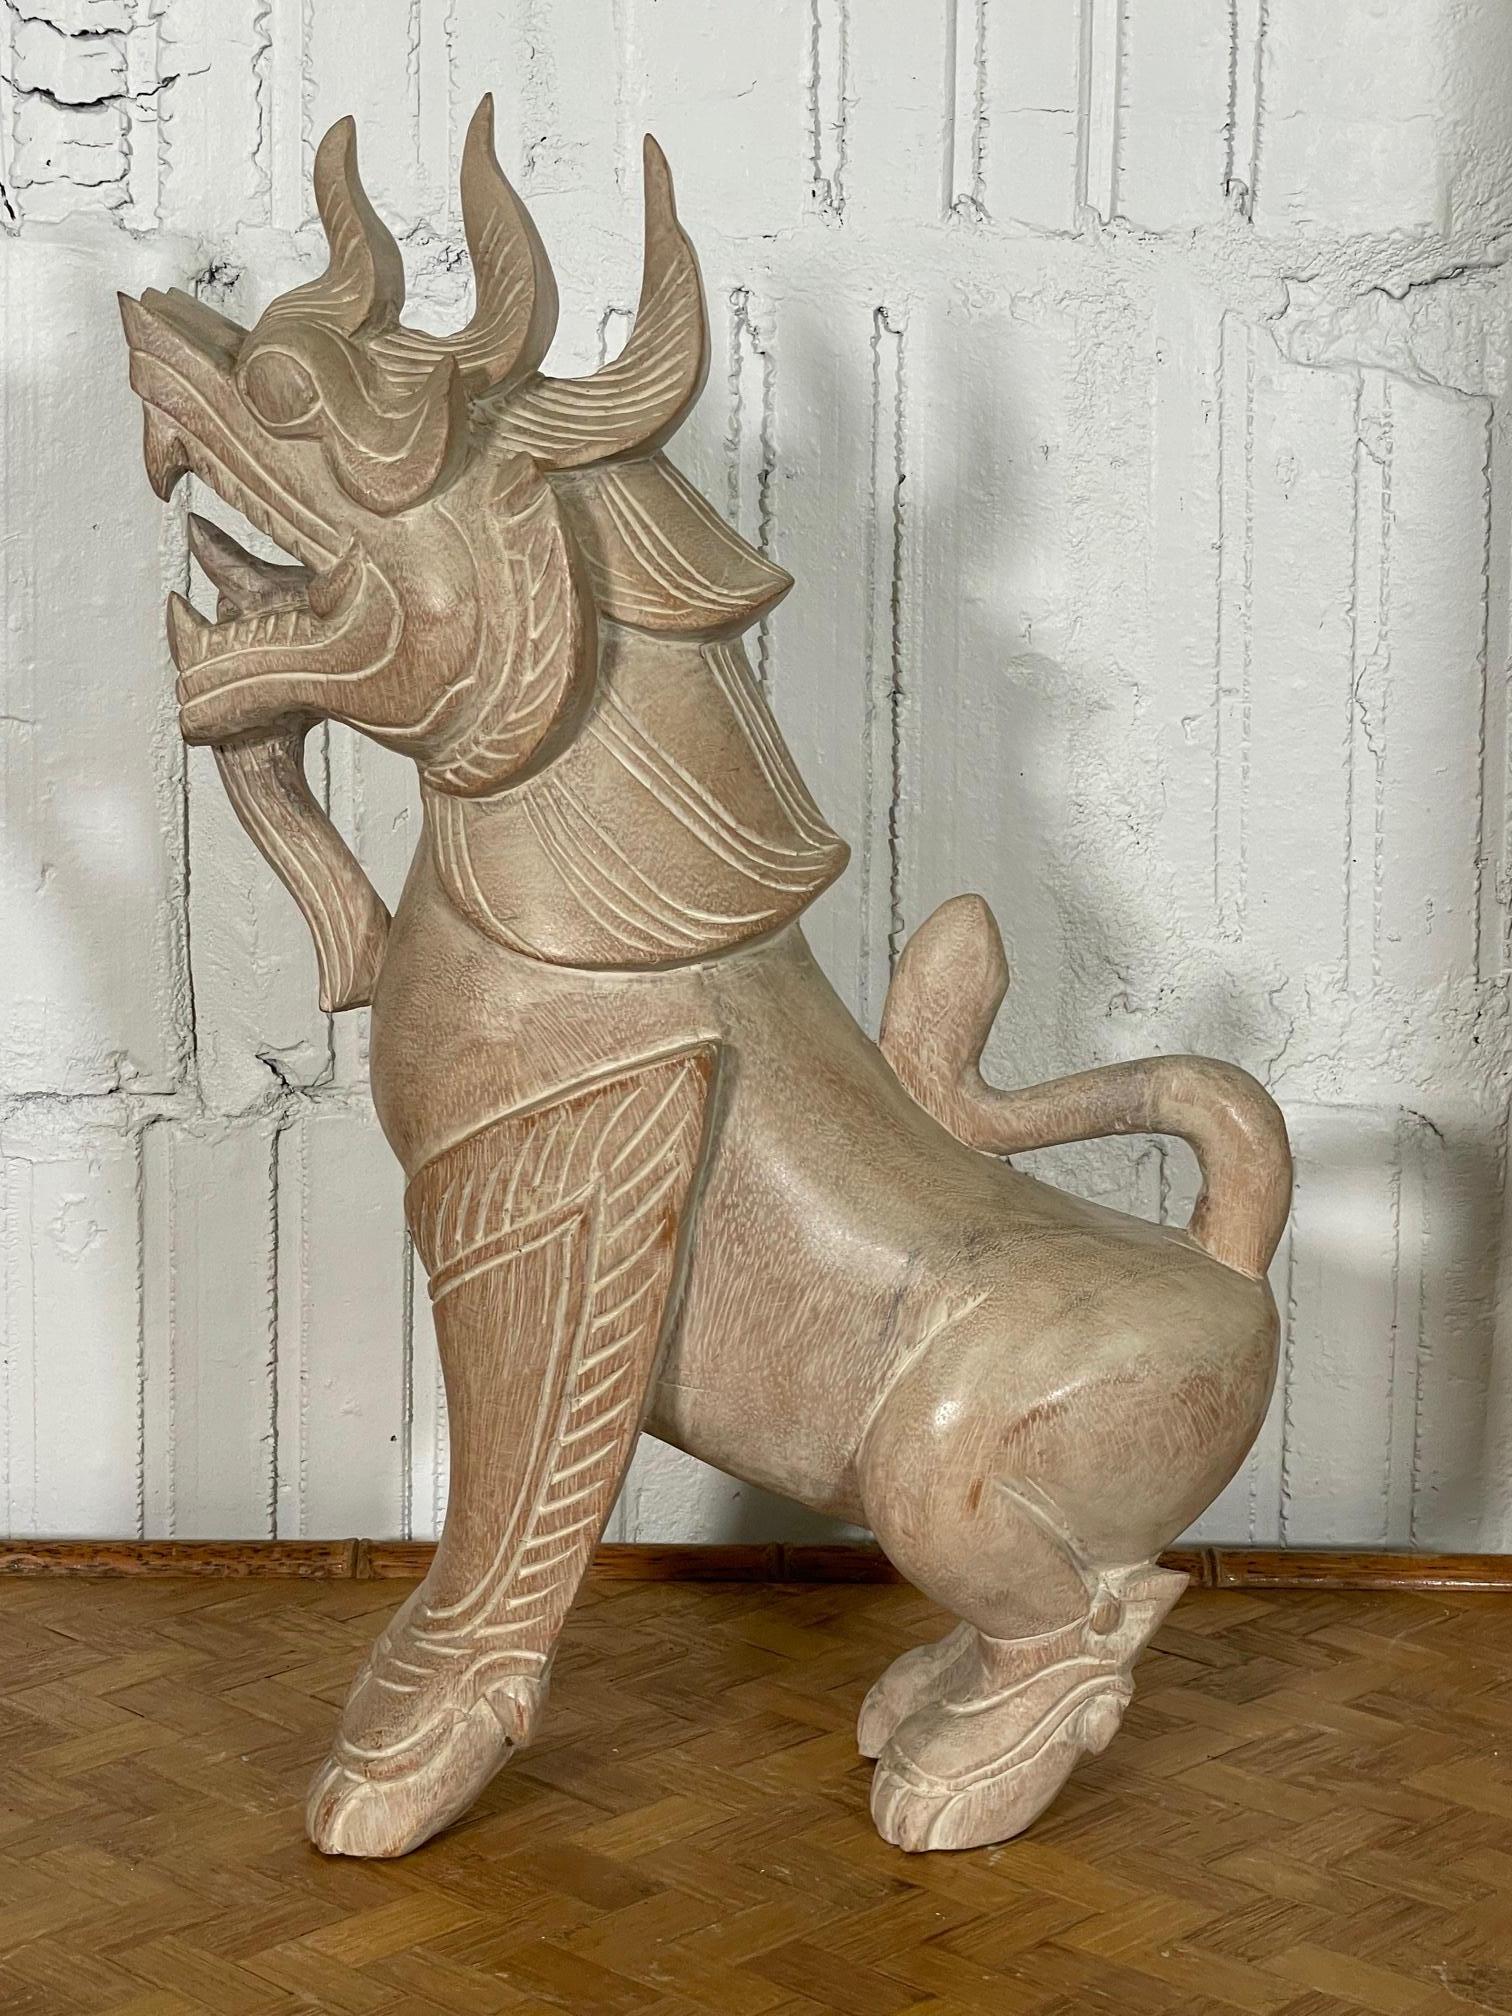 Carved wood Qilin, or Japanese unicorn, also referred to as Kirin. Stands 19.5